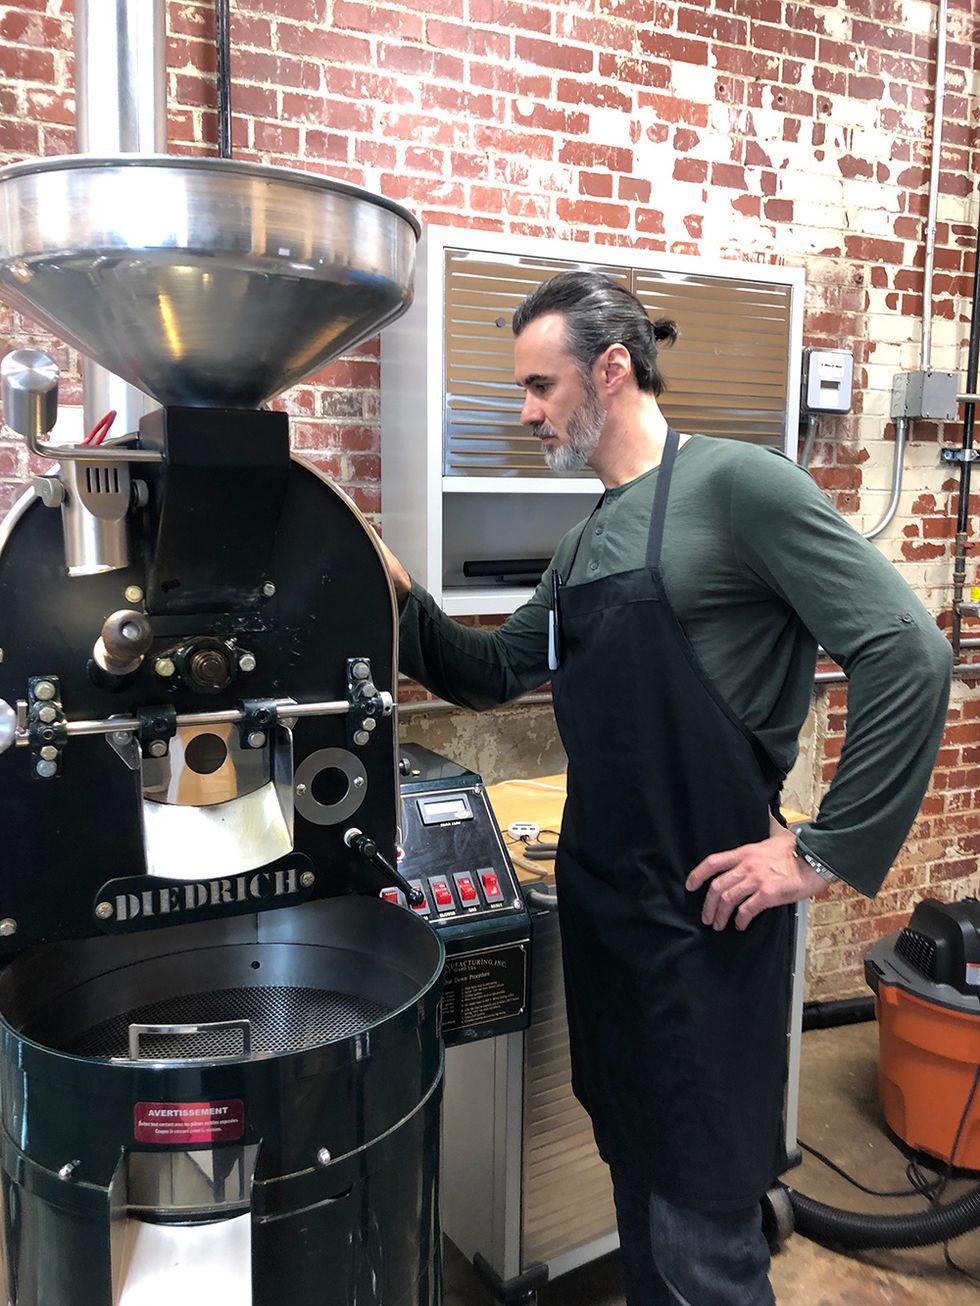 Paul, wearing a black apron, stands next to a large machine used to roast or blend the coffee.